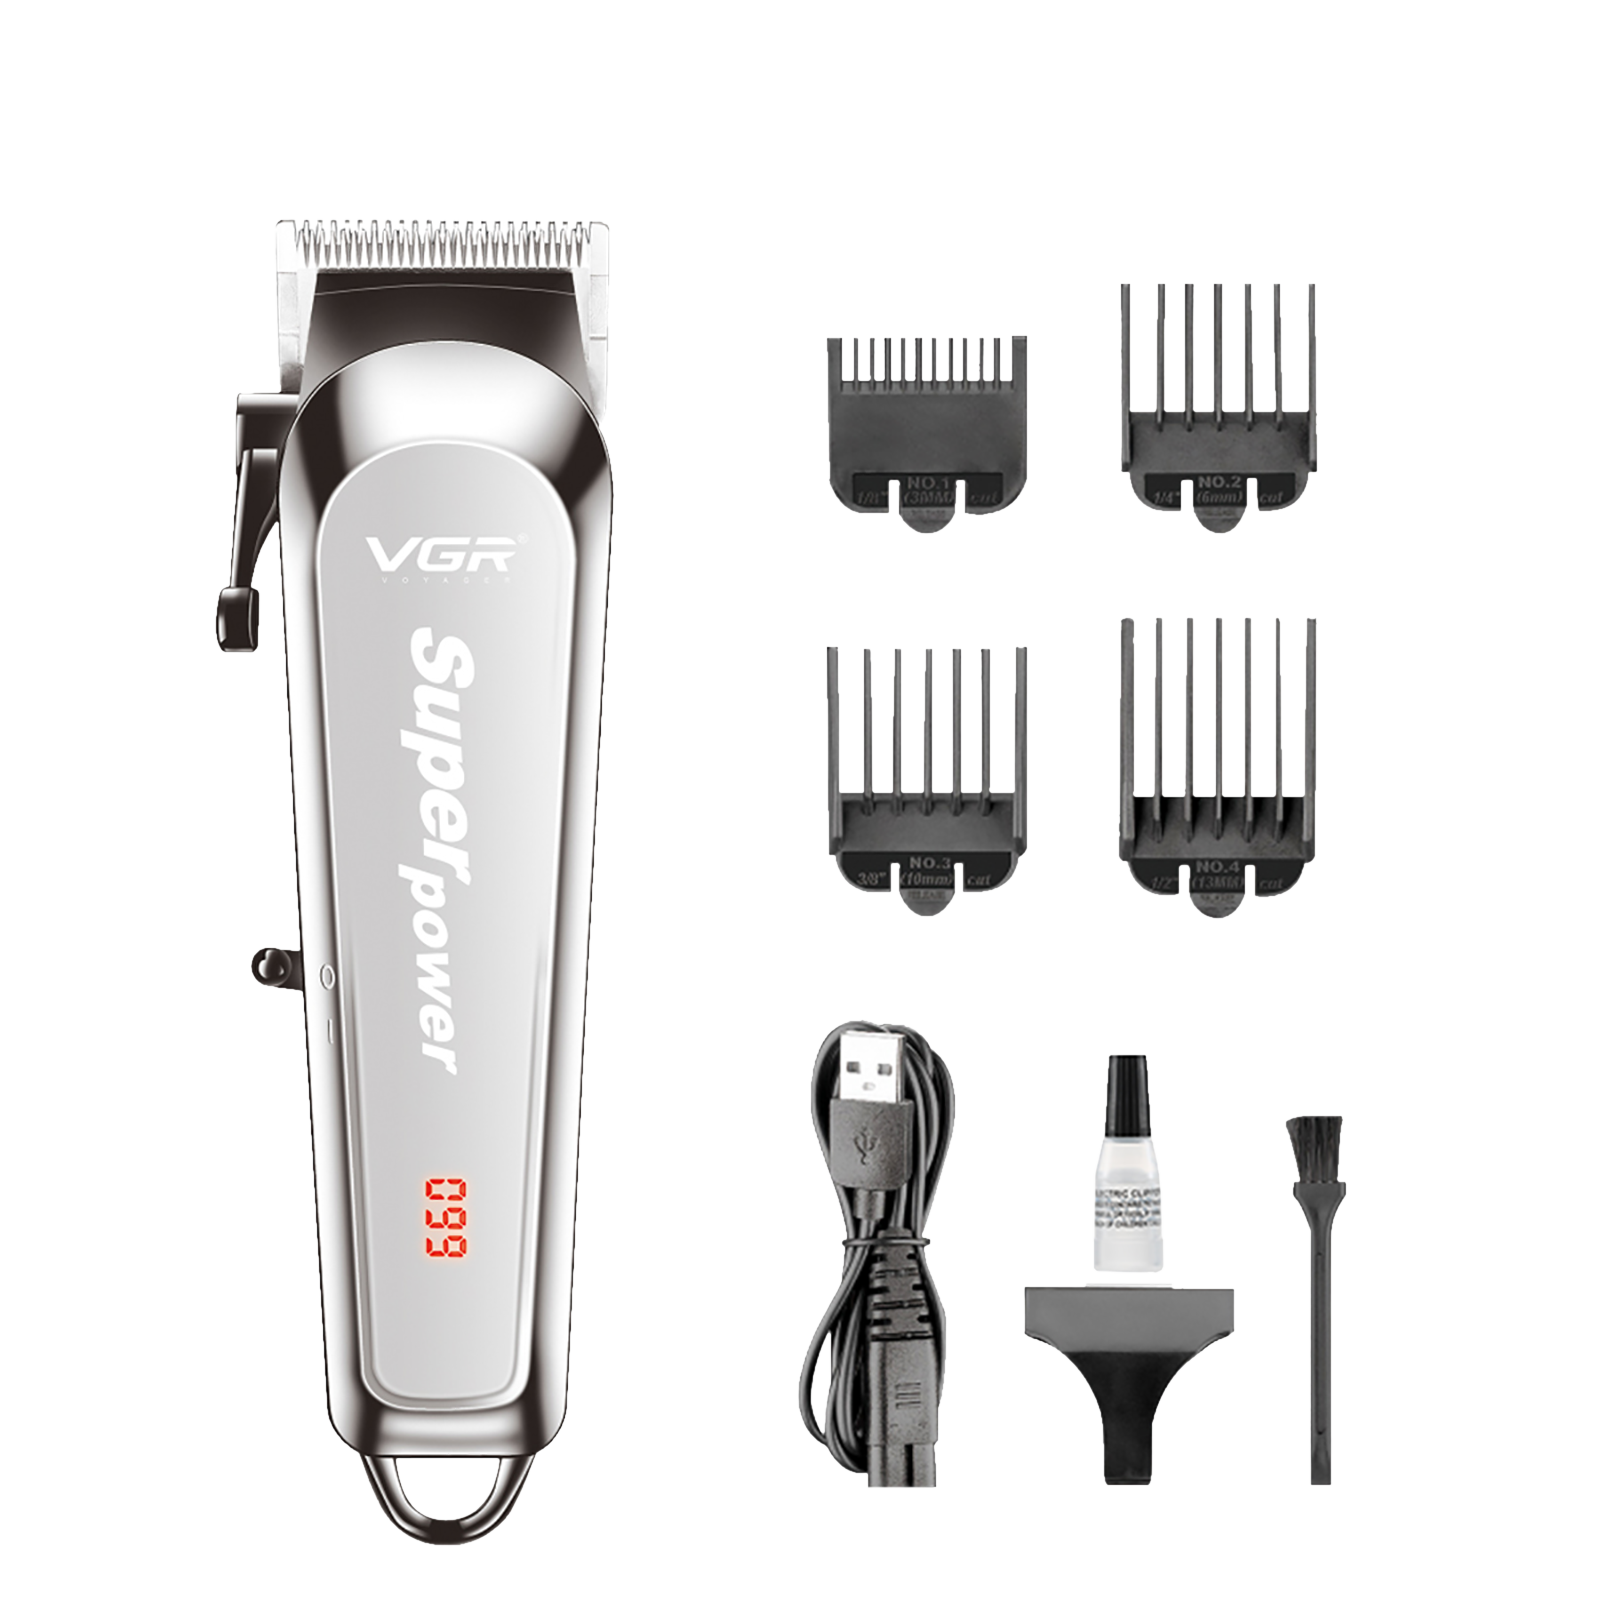 VGR V-060 Rechargeable Cordless Dry Trimmer for Hair Clipping, Beard, Moustache & Body Grooming with 4 Length Settings for Men (150min Runtime, Digital LED Display, Silver)